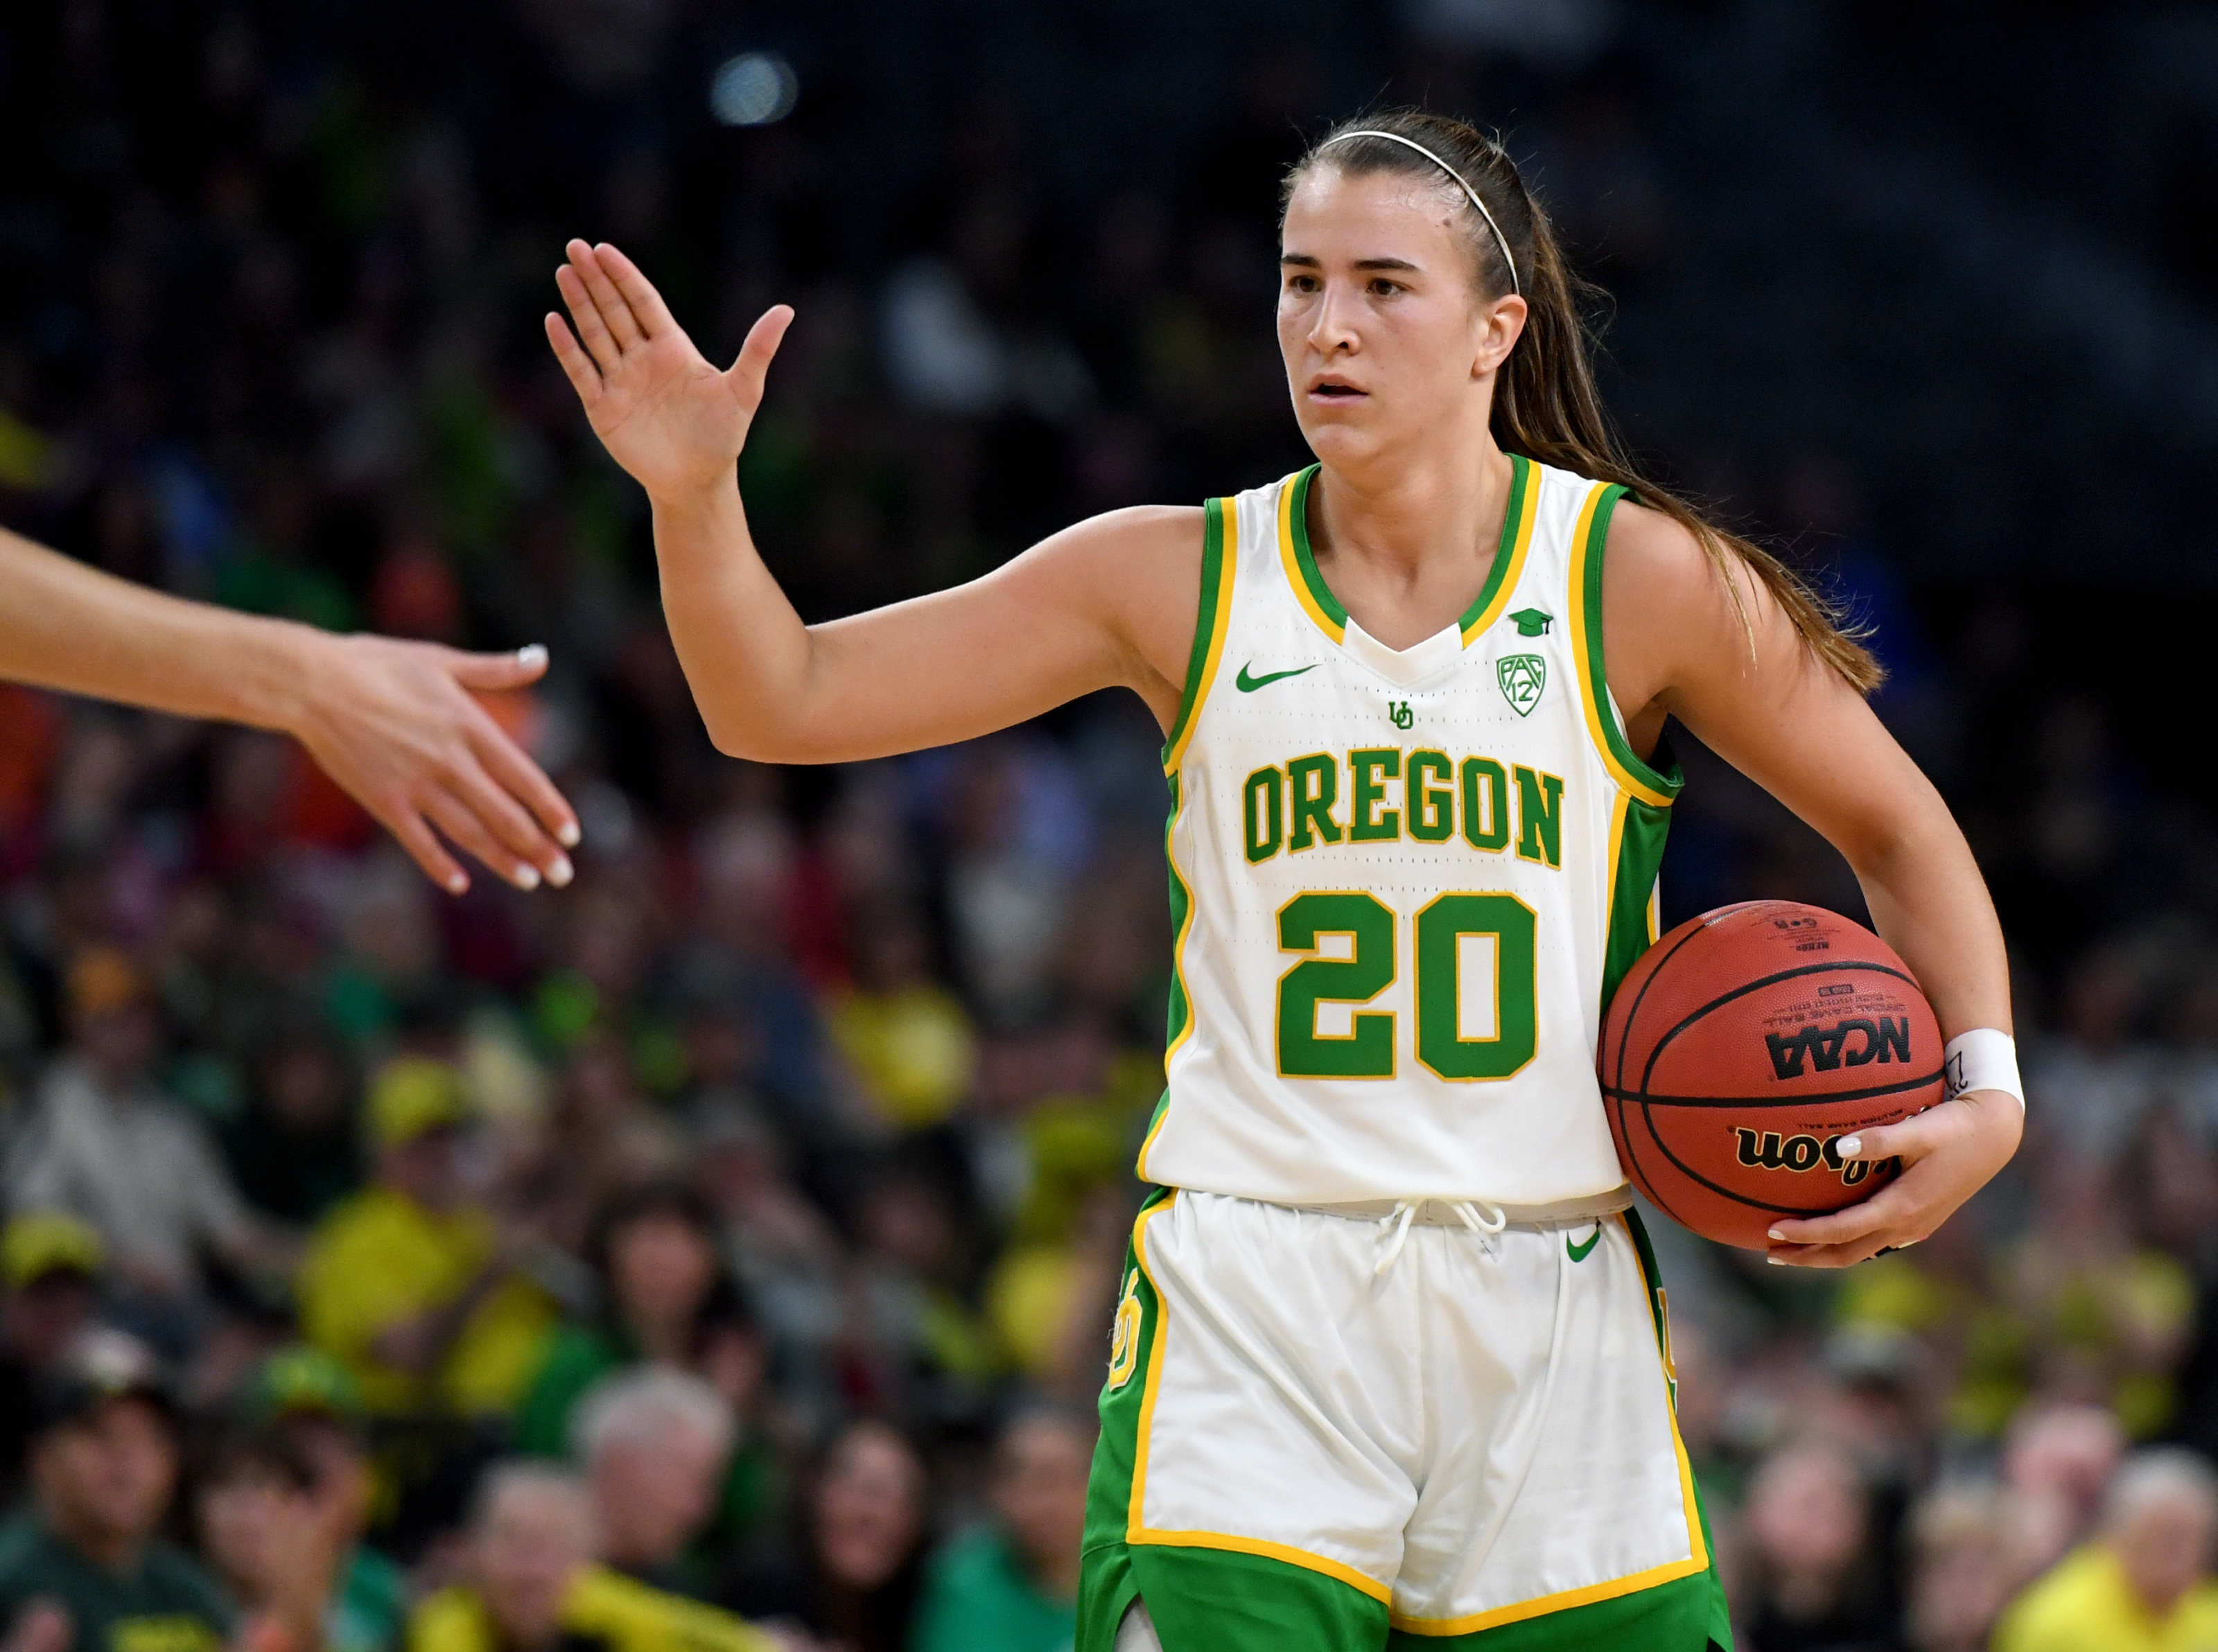 Watch WNBA Player Sabrina Ionescu Make History in the 3-Point Contest